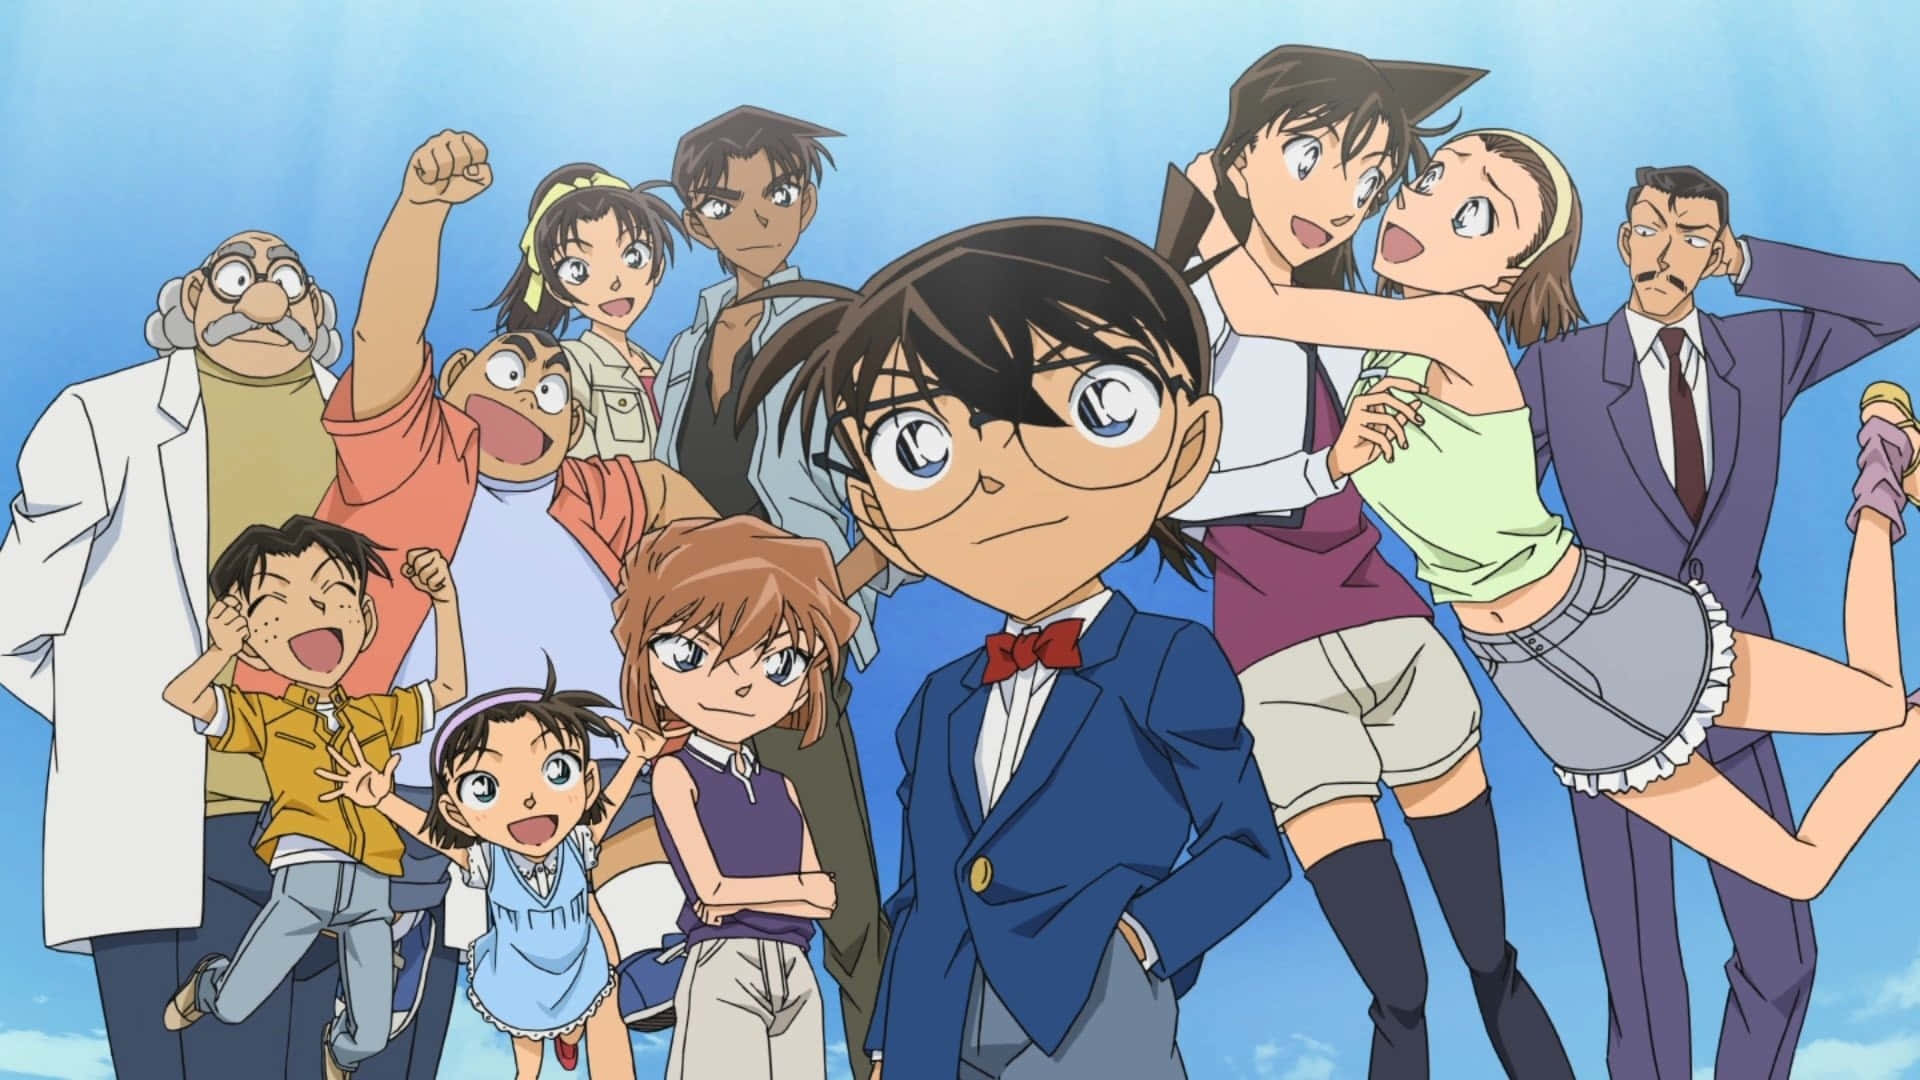 Solving the mystery with Detective Conan